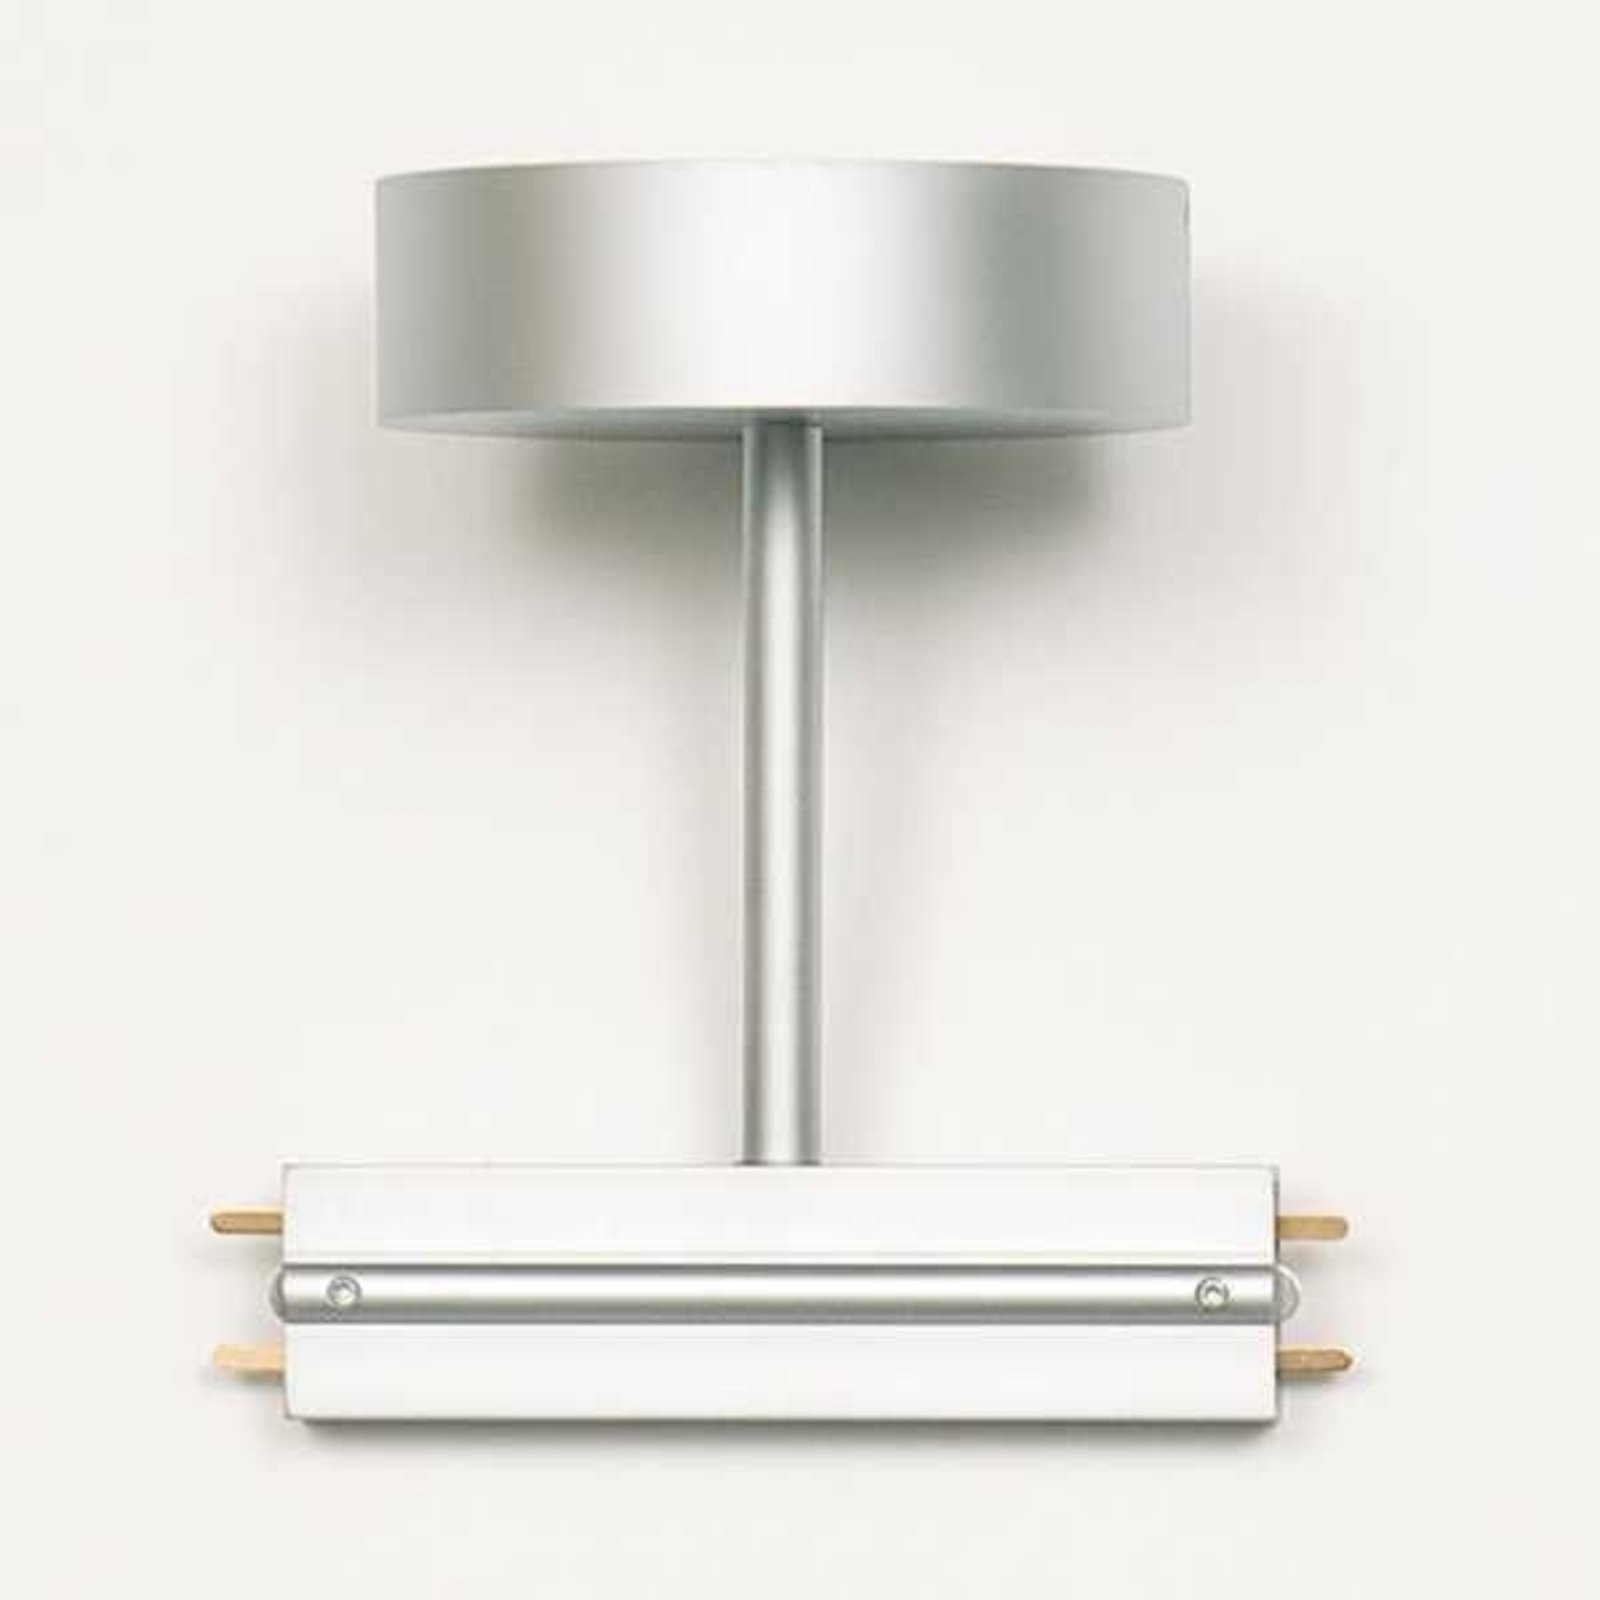 Ceiling power feed for Check-In 525mm track lighting system